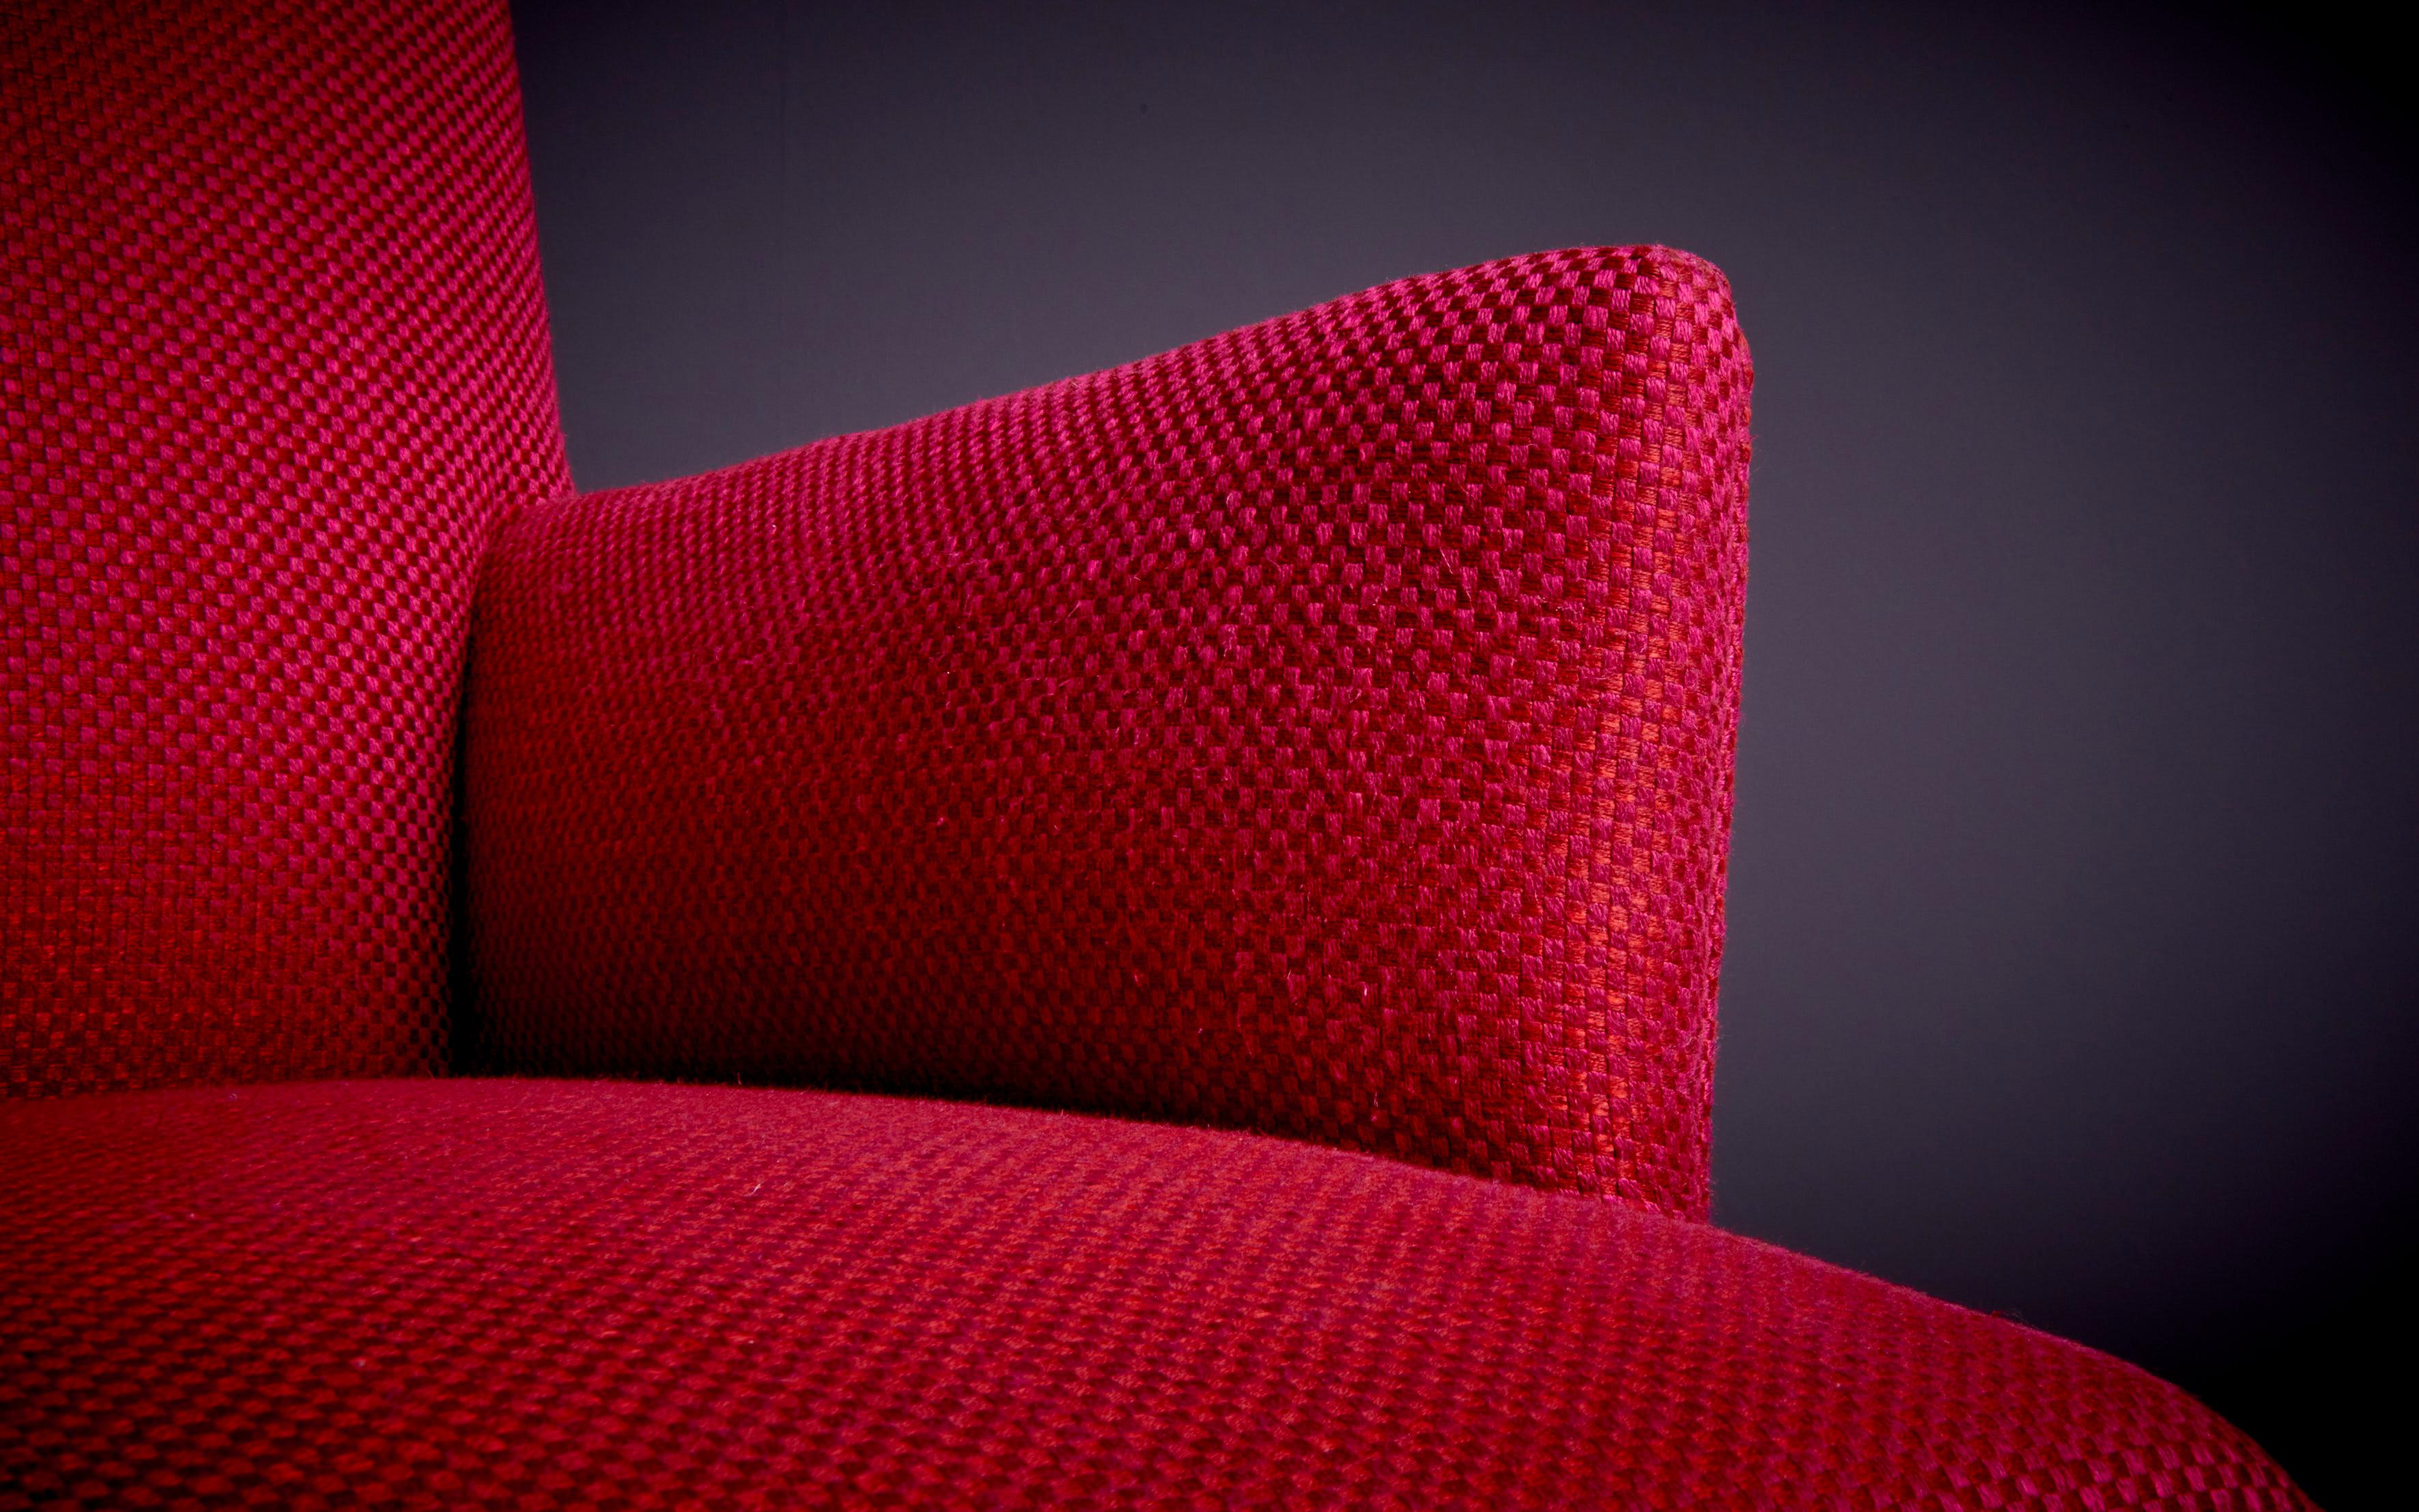 American Pair of New Upholstered Midcentury Armchairs in Magenta, USA, 1950s